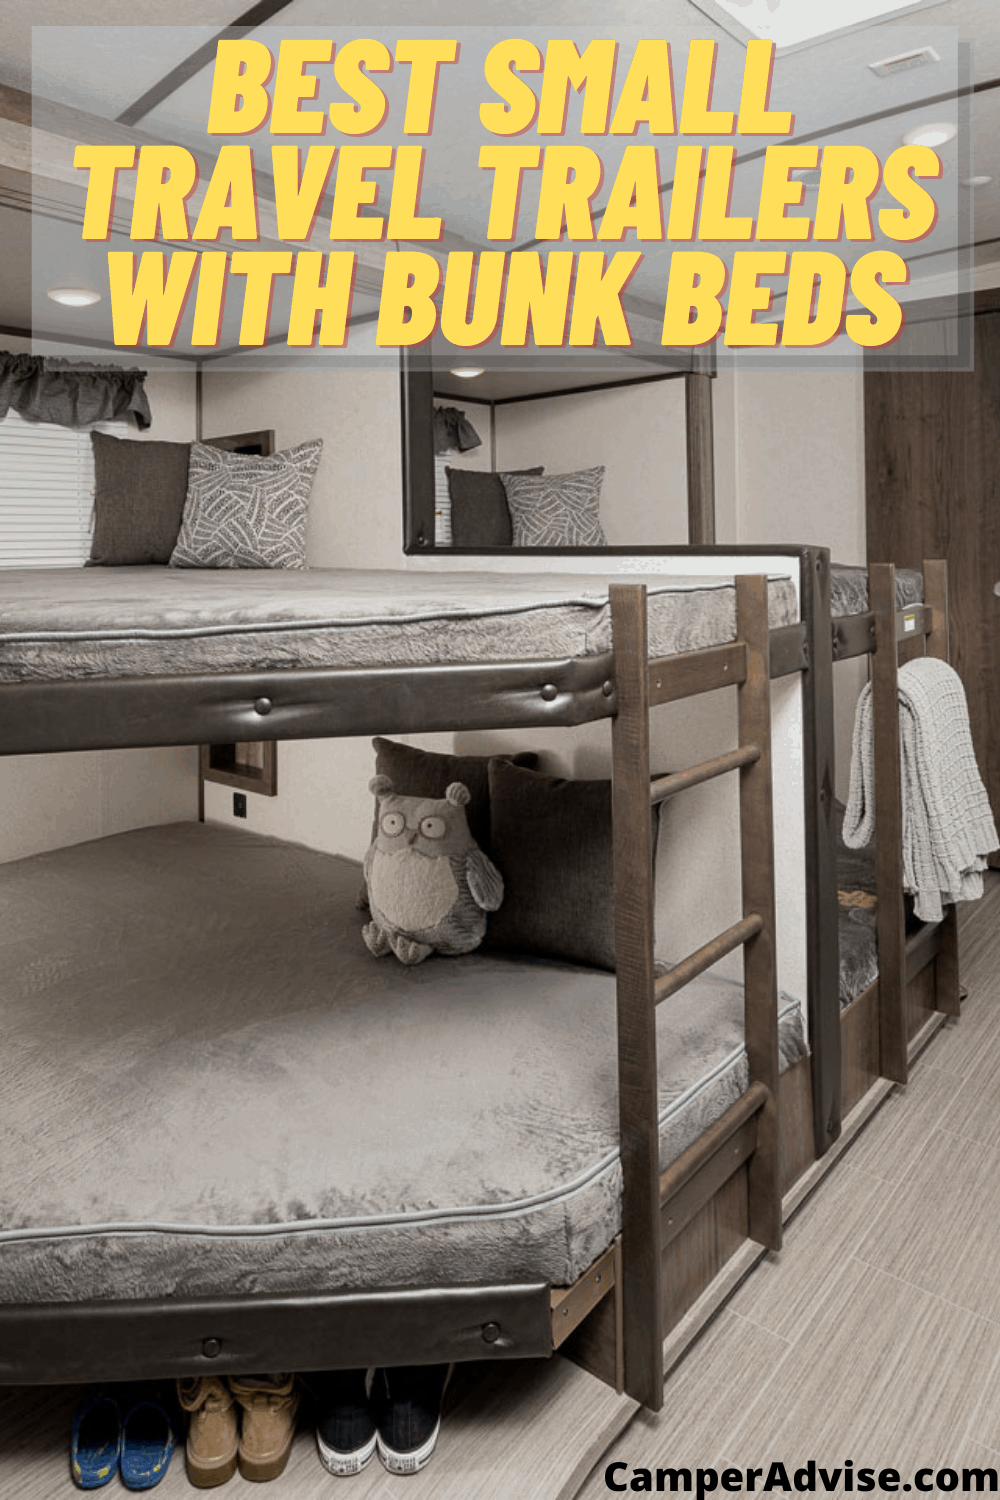 Small Travel Trailers With Bunk Beds, Travel Bunk Beds